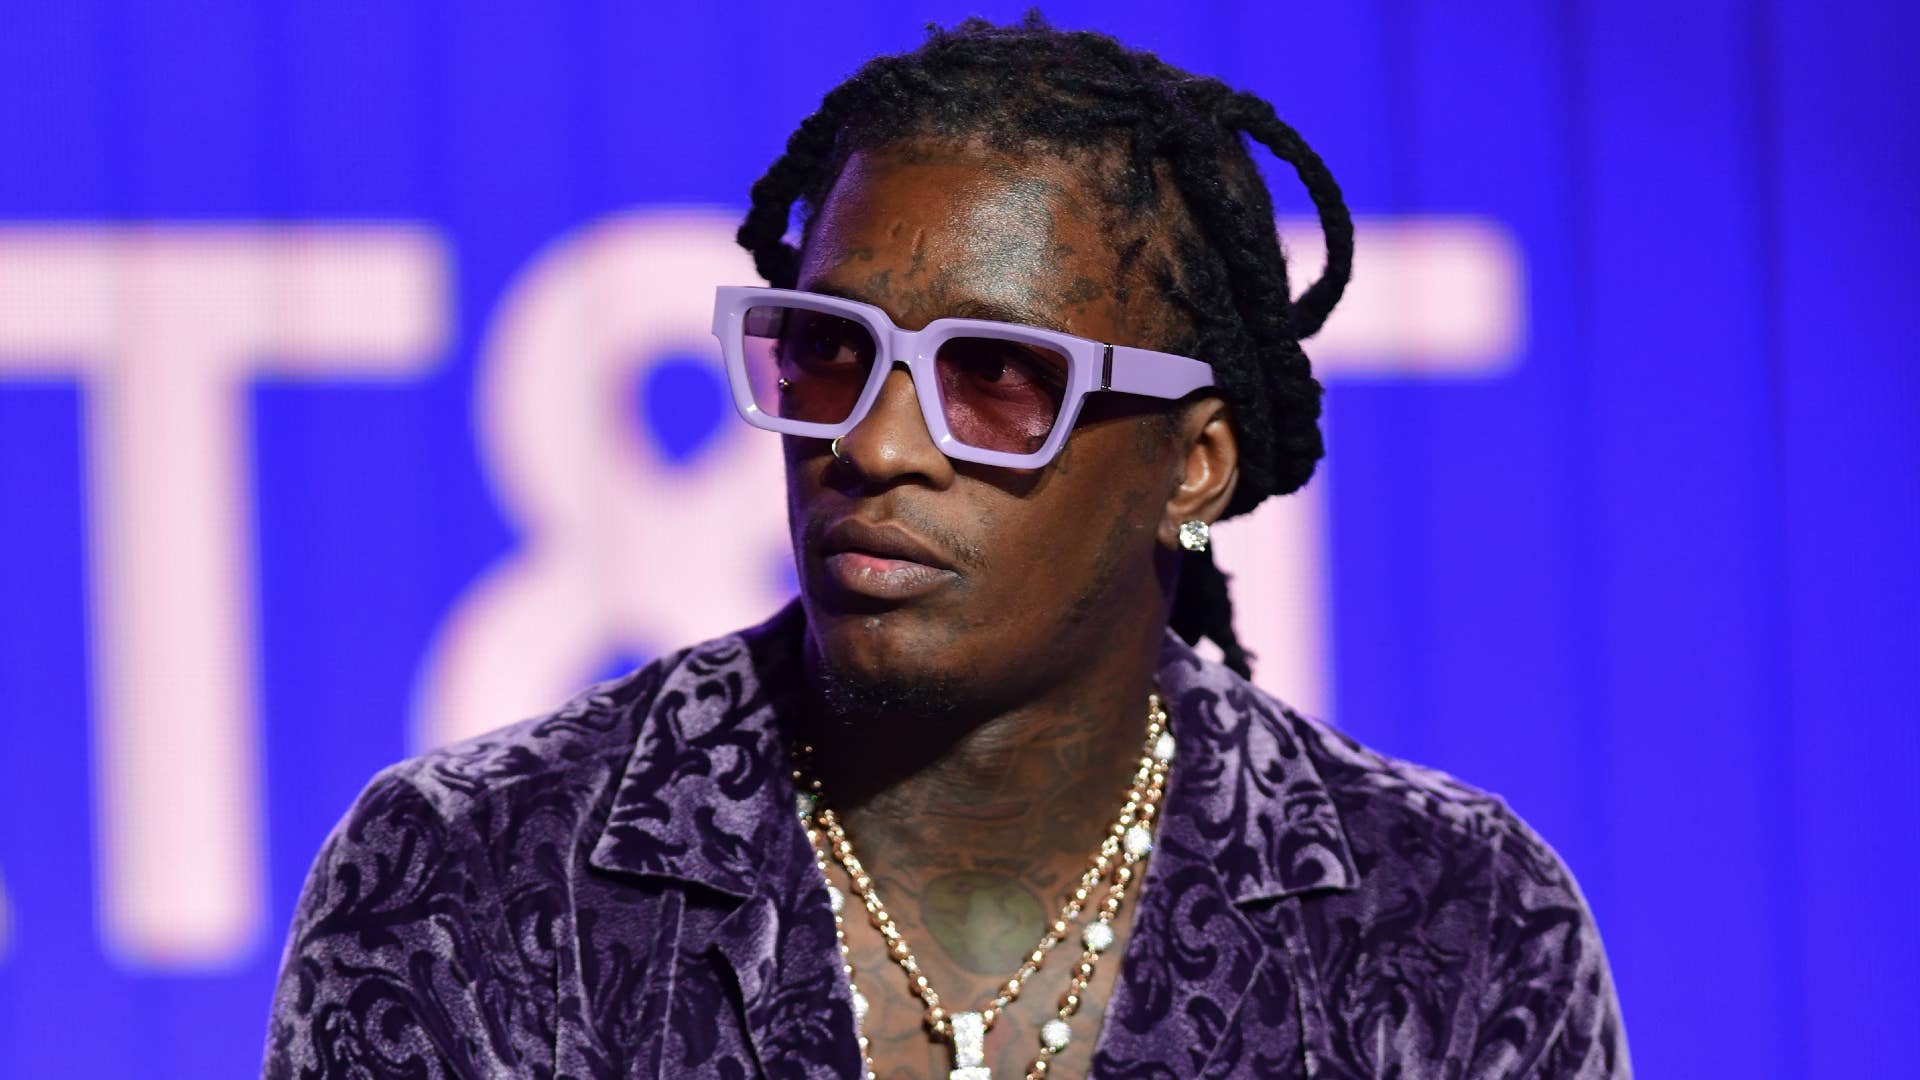 Young Thug is seen speaking at a panel event